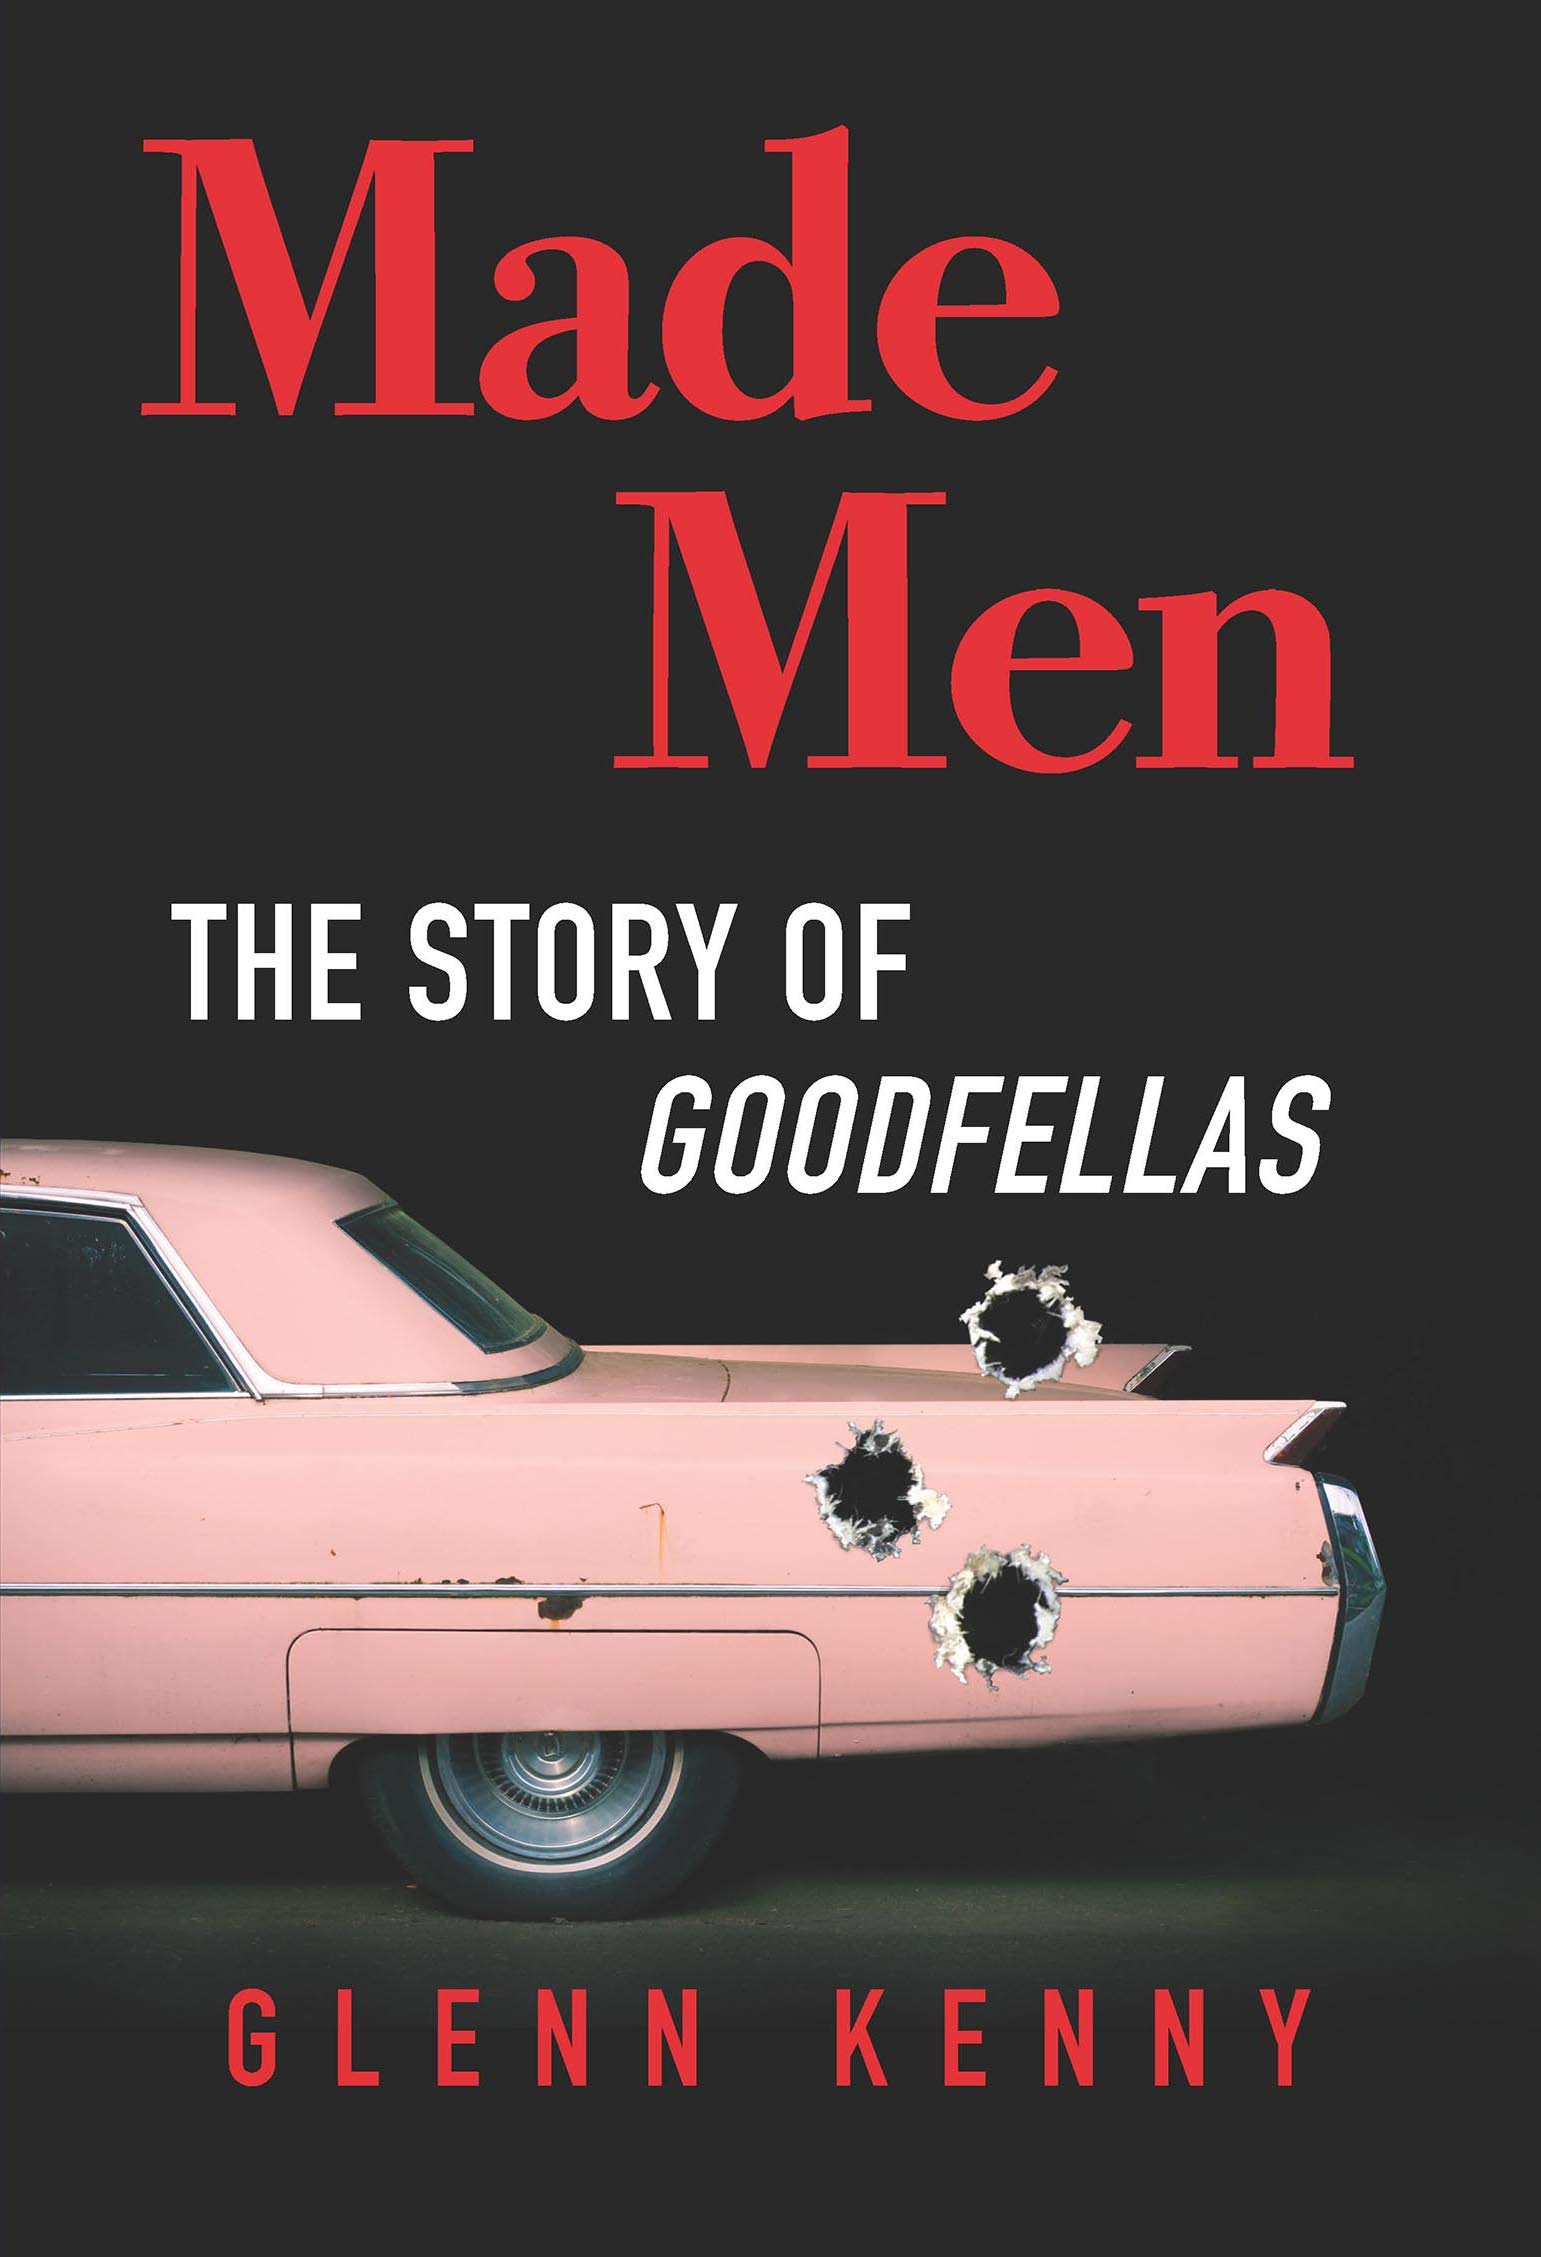 Made Men: The Making of Goodfellas and the Reboot of the American Gangster Picture